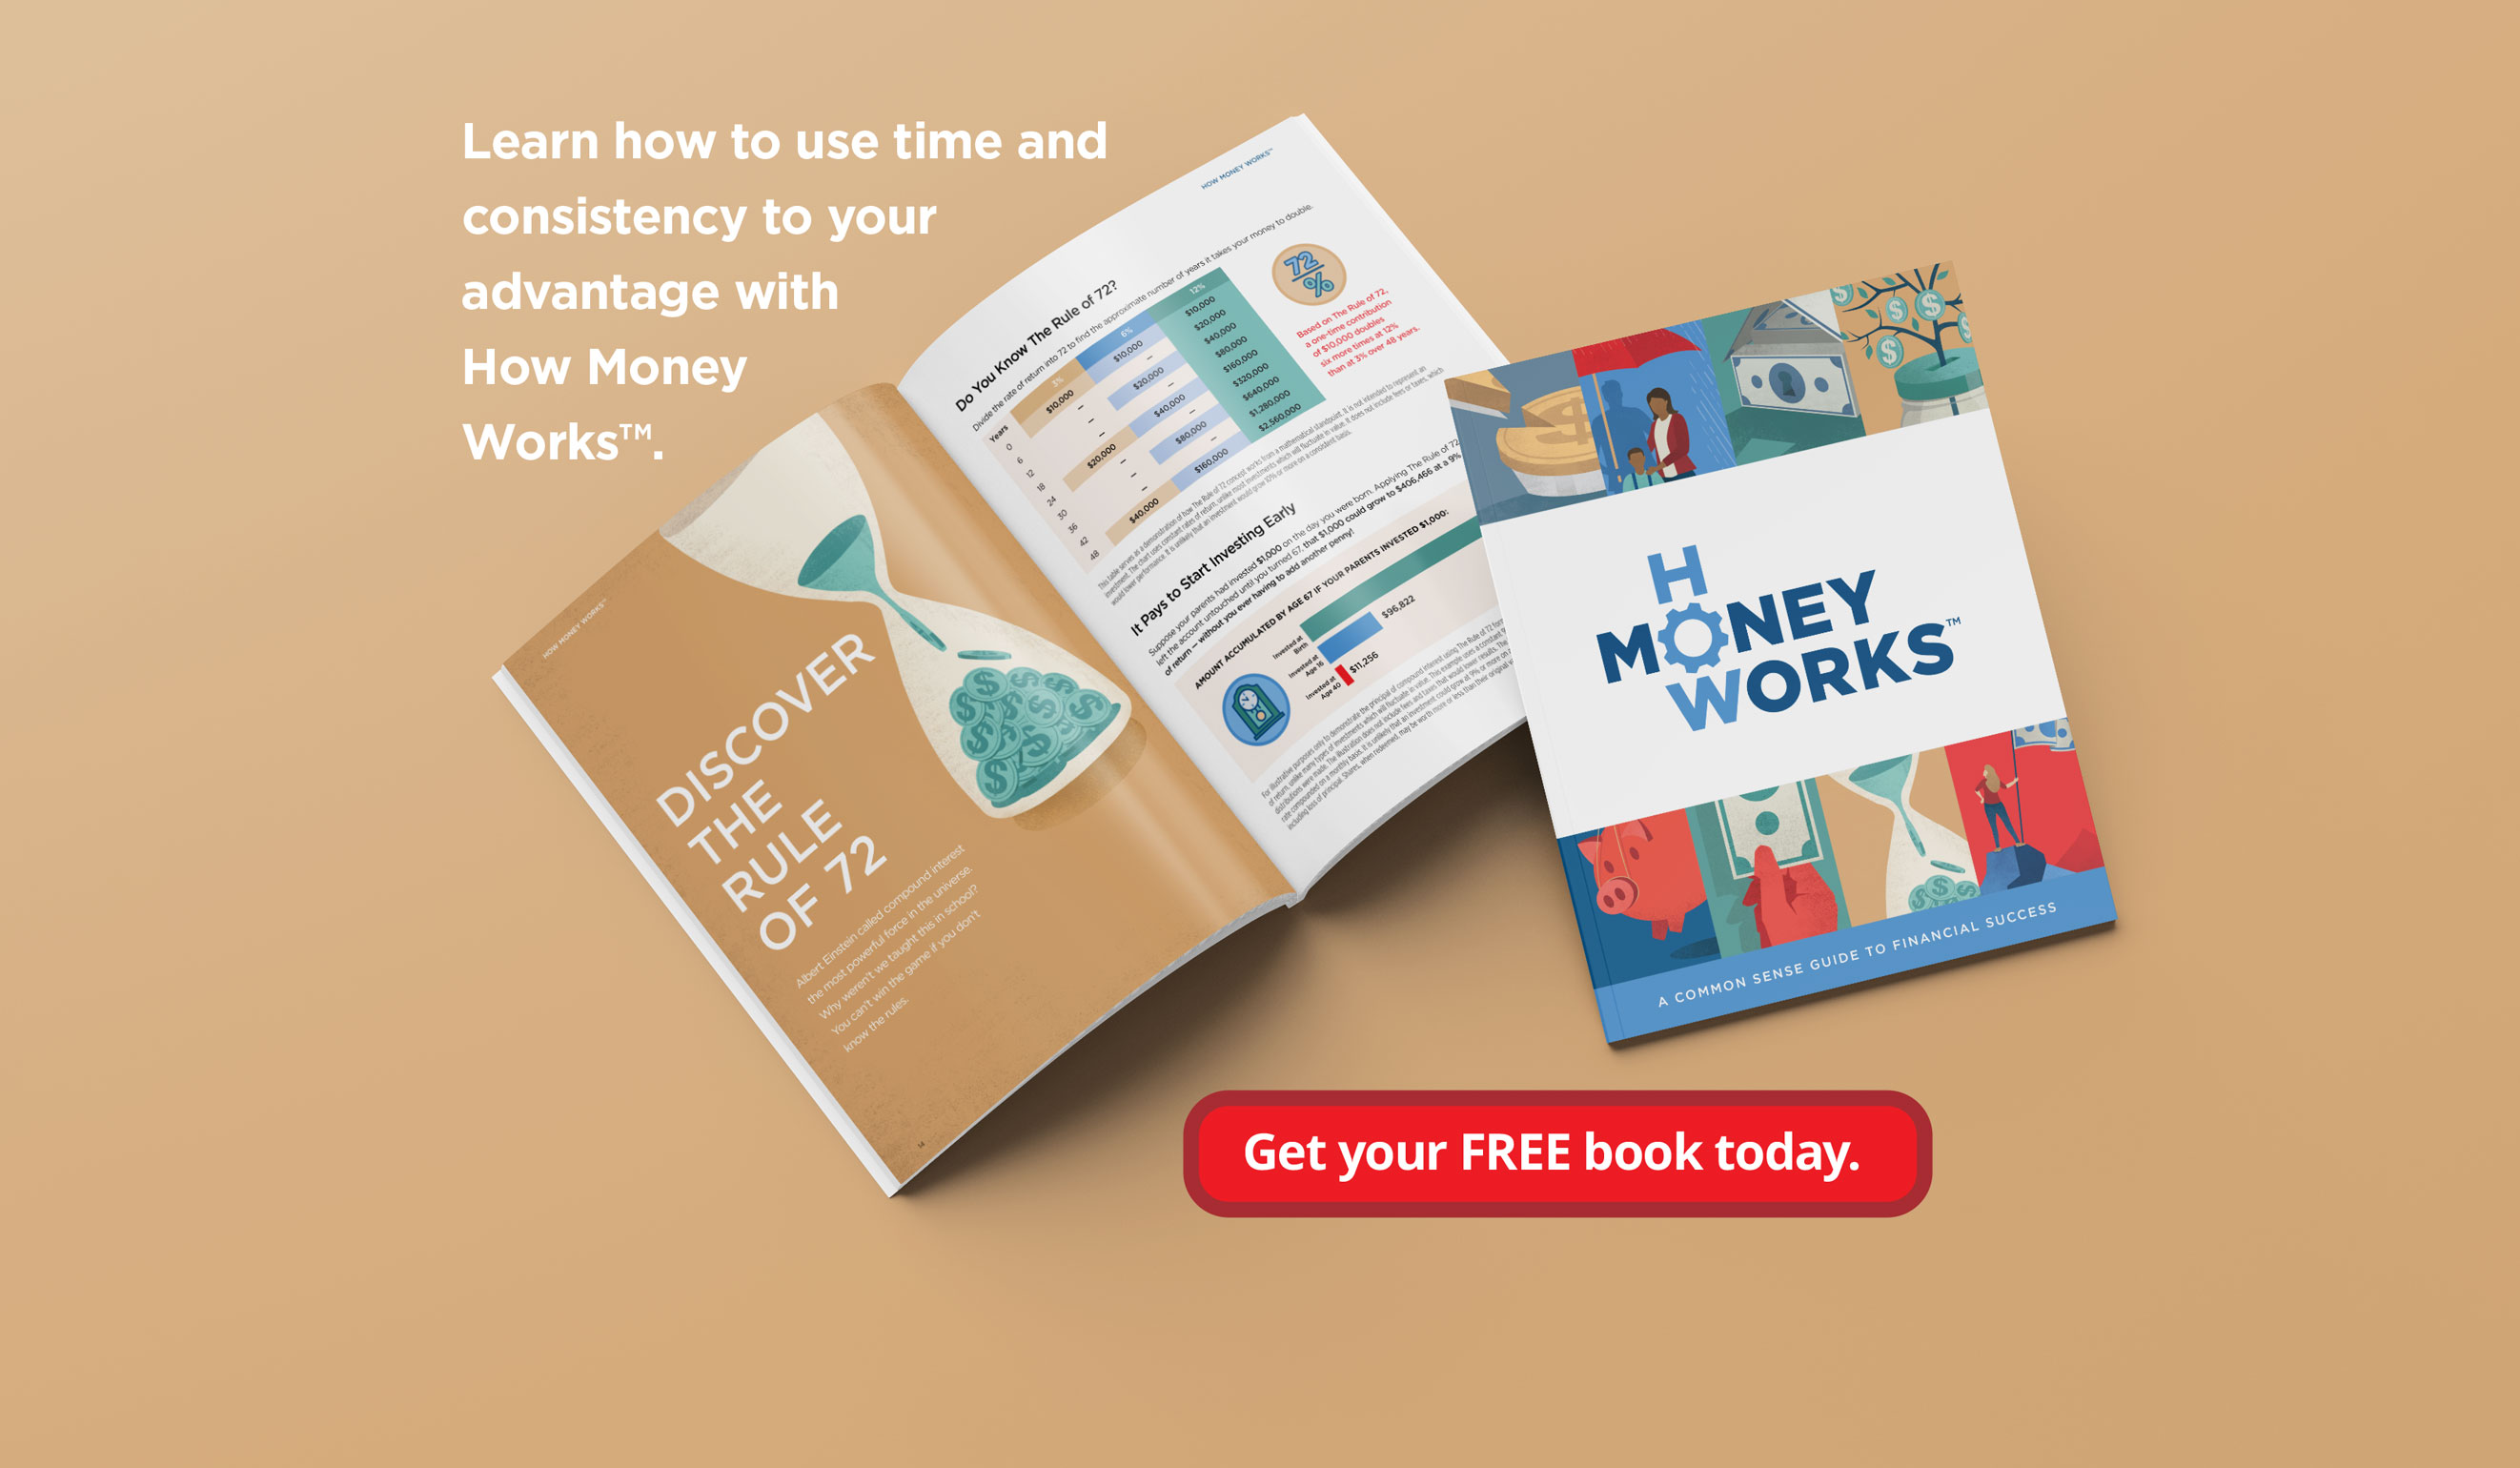 Learn how to use time and consistency to your advantage with How Money Work™. Get Your FREE copy today!